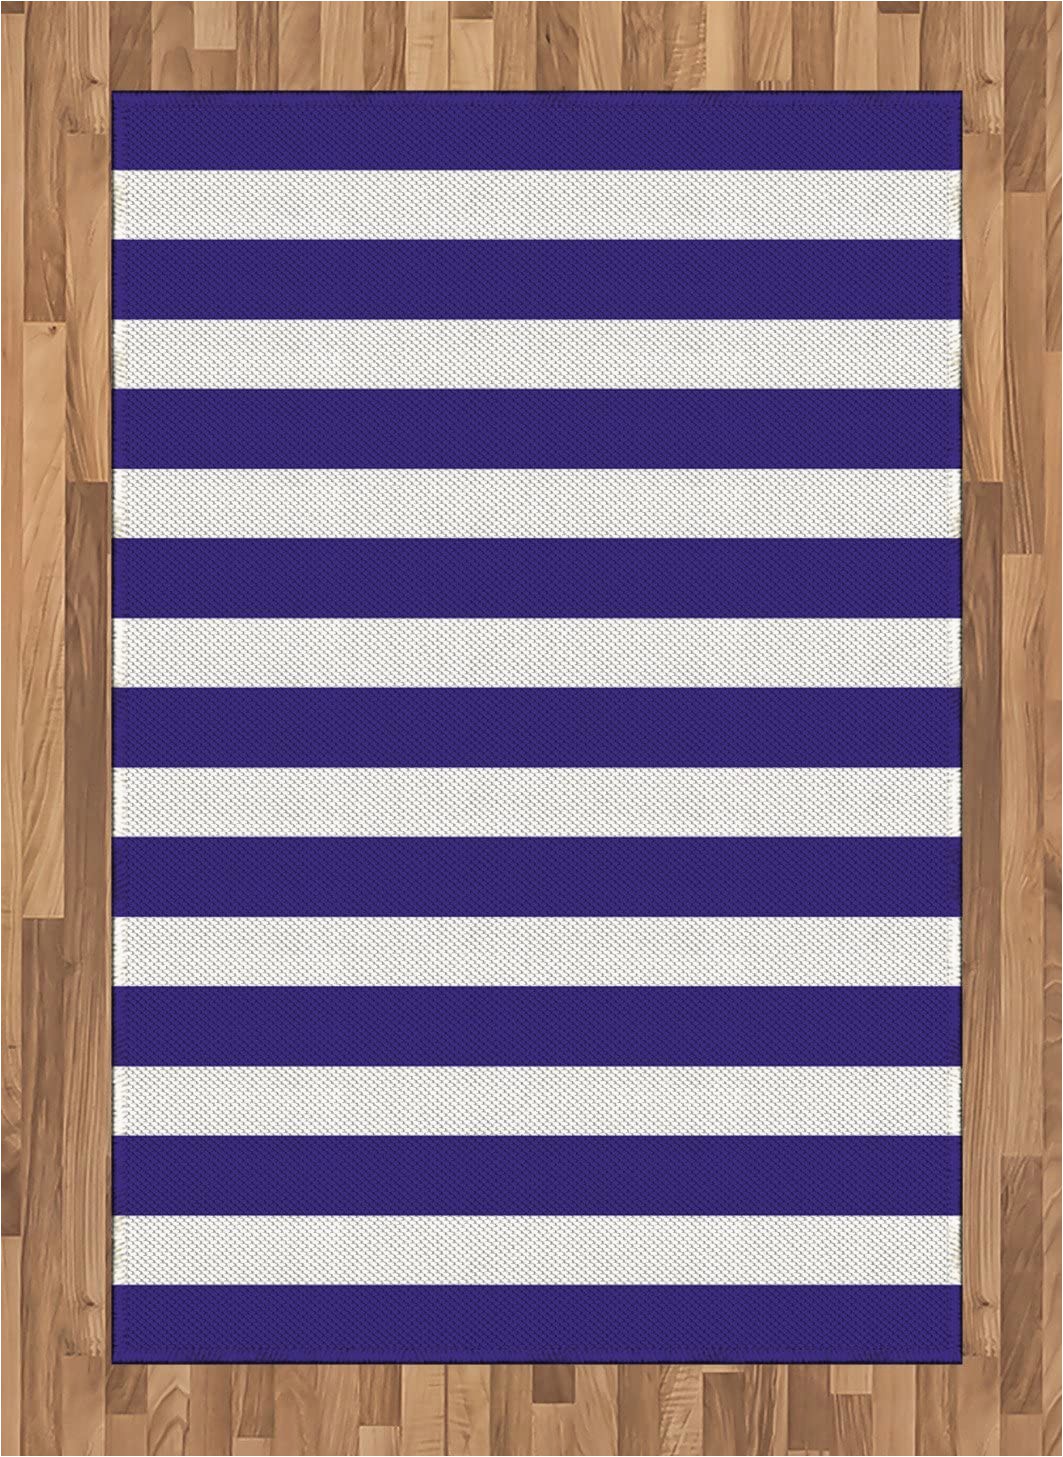 Navy Blue Striped area Rug Ambesonne Striped area Rug Nautical Marine Style Navy Blue and White Sailor theme Geometric Pattern Art Print Flat Woven Accent Rug for Living Room